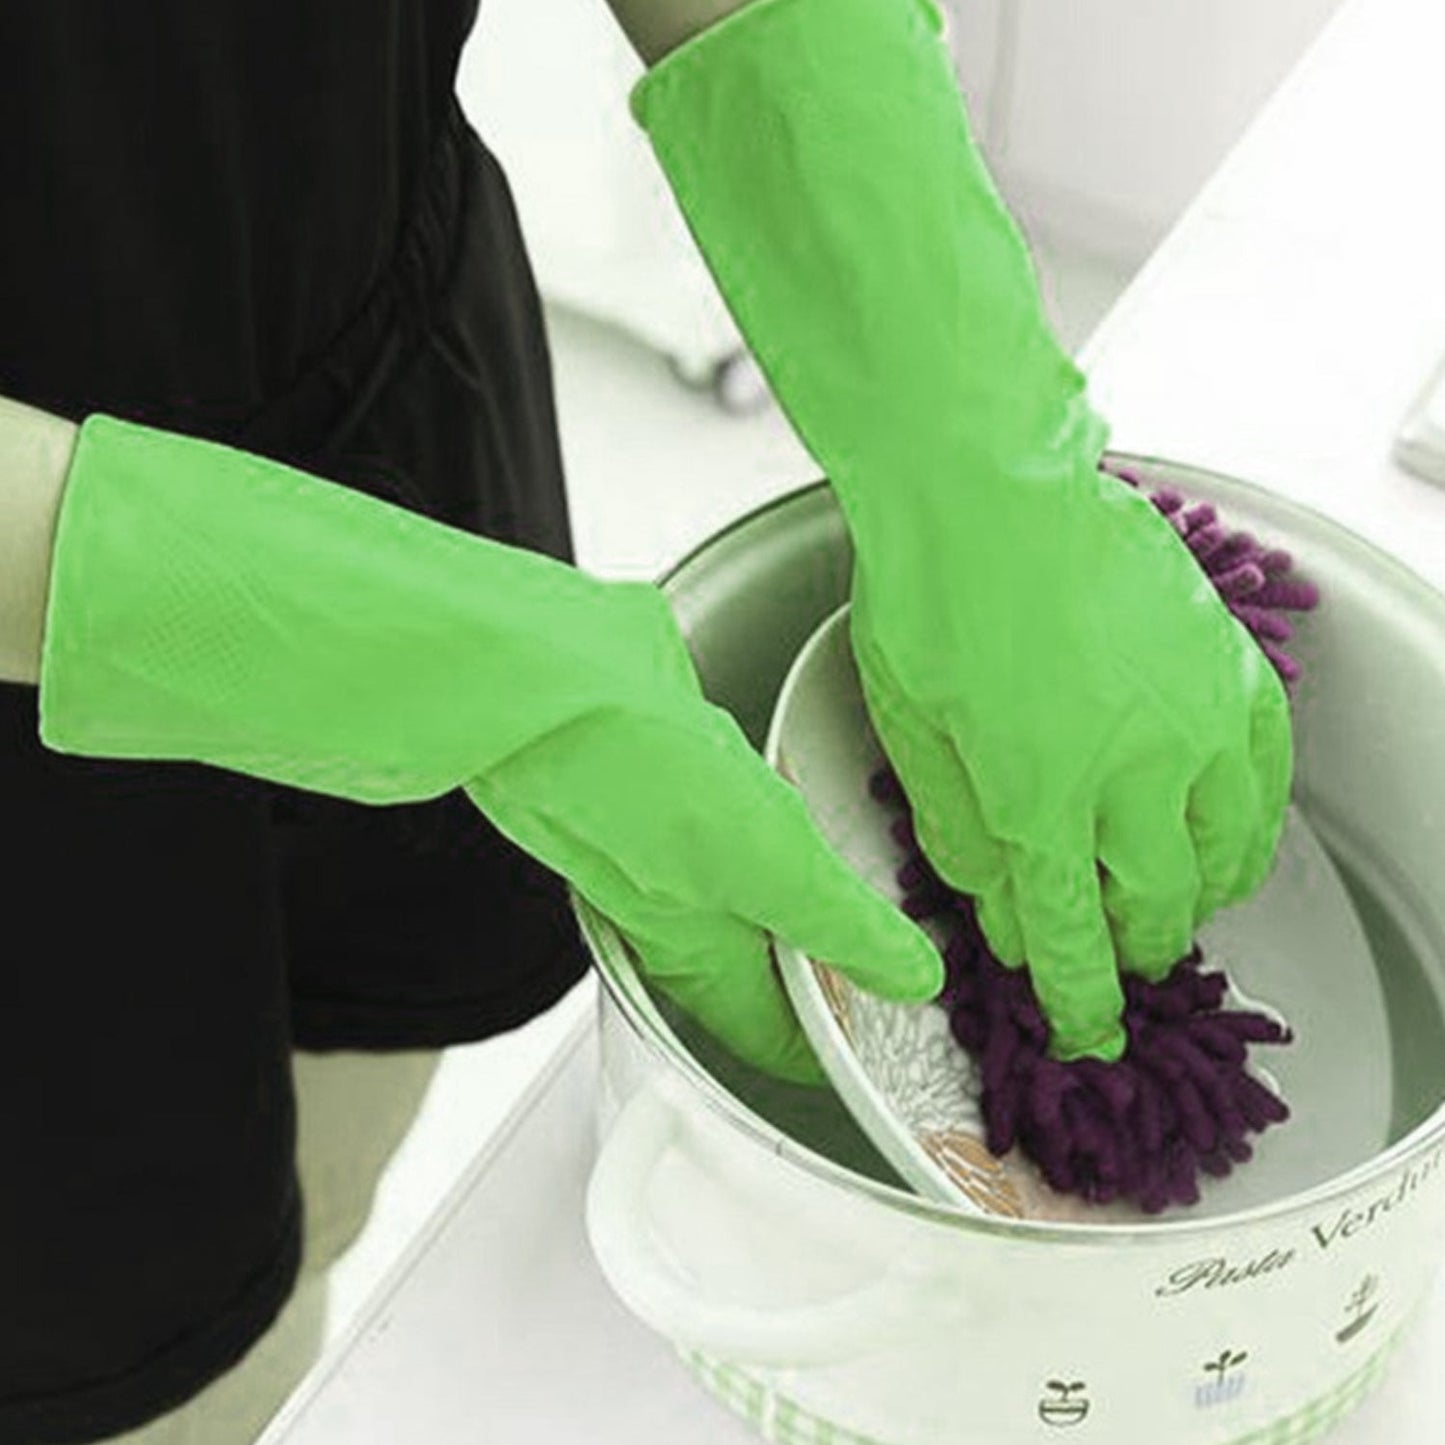 0653 Multipurpose cleaning rubber hand gloves (green) 1 PC